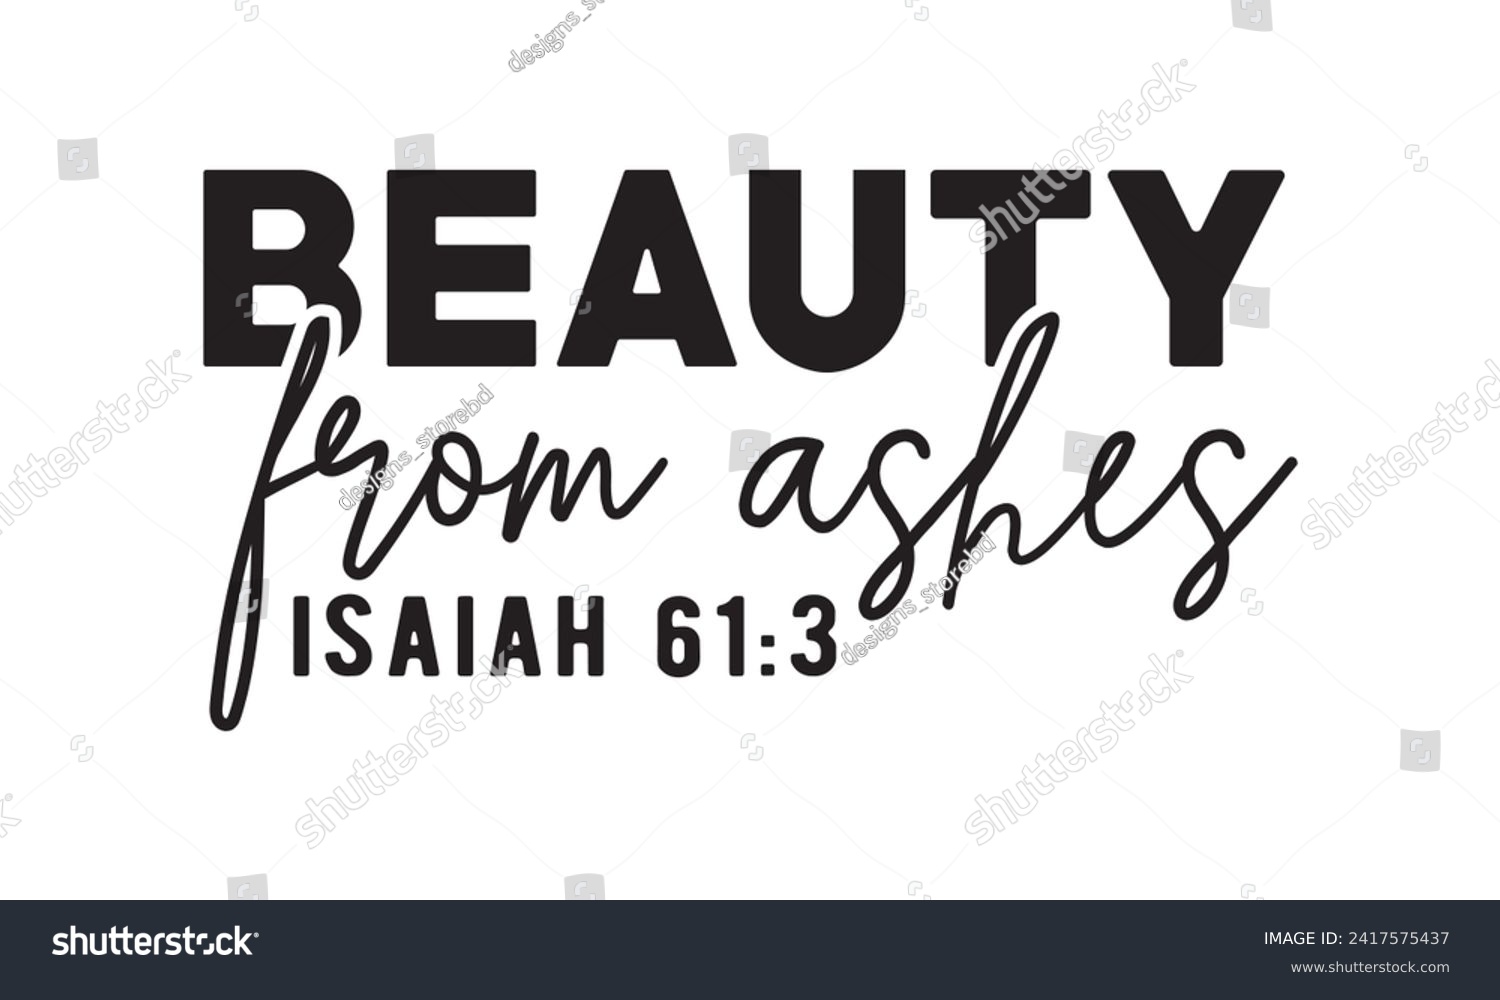 SVG of Beauty from ashes isaiah 61:3,christian,jesus,Jesus Christian t-shirt design Bundle,Retro christian,funny christian,Printable Vector Illustration,Holiday,Cut Files Cricut,Silhouette,png svg